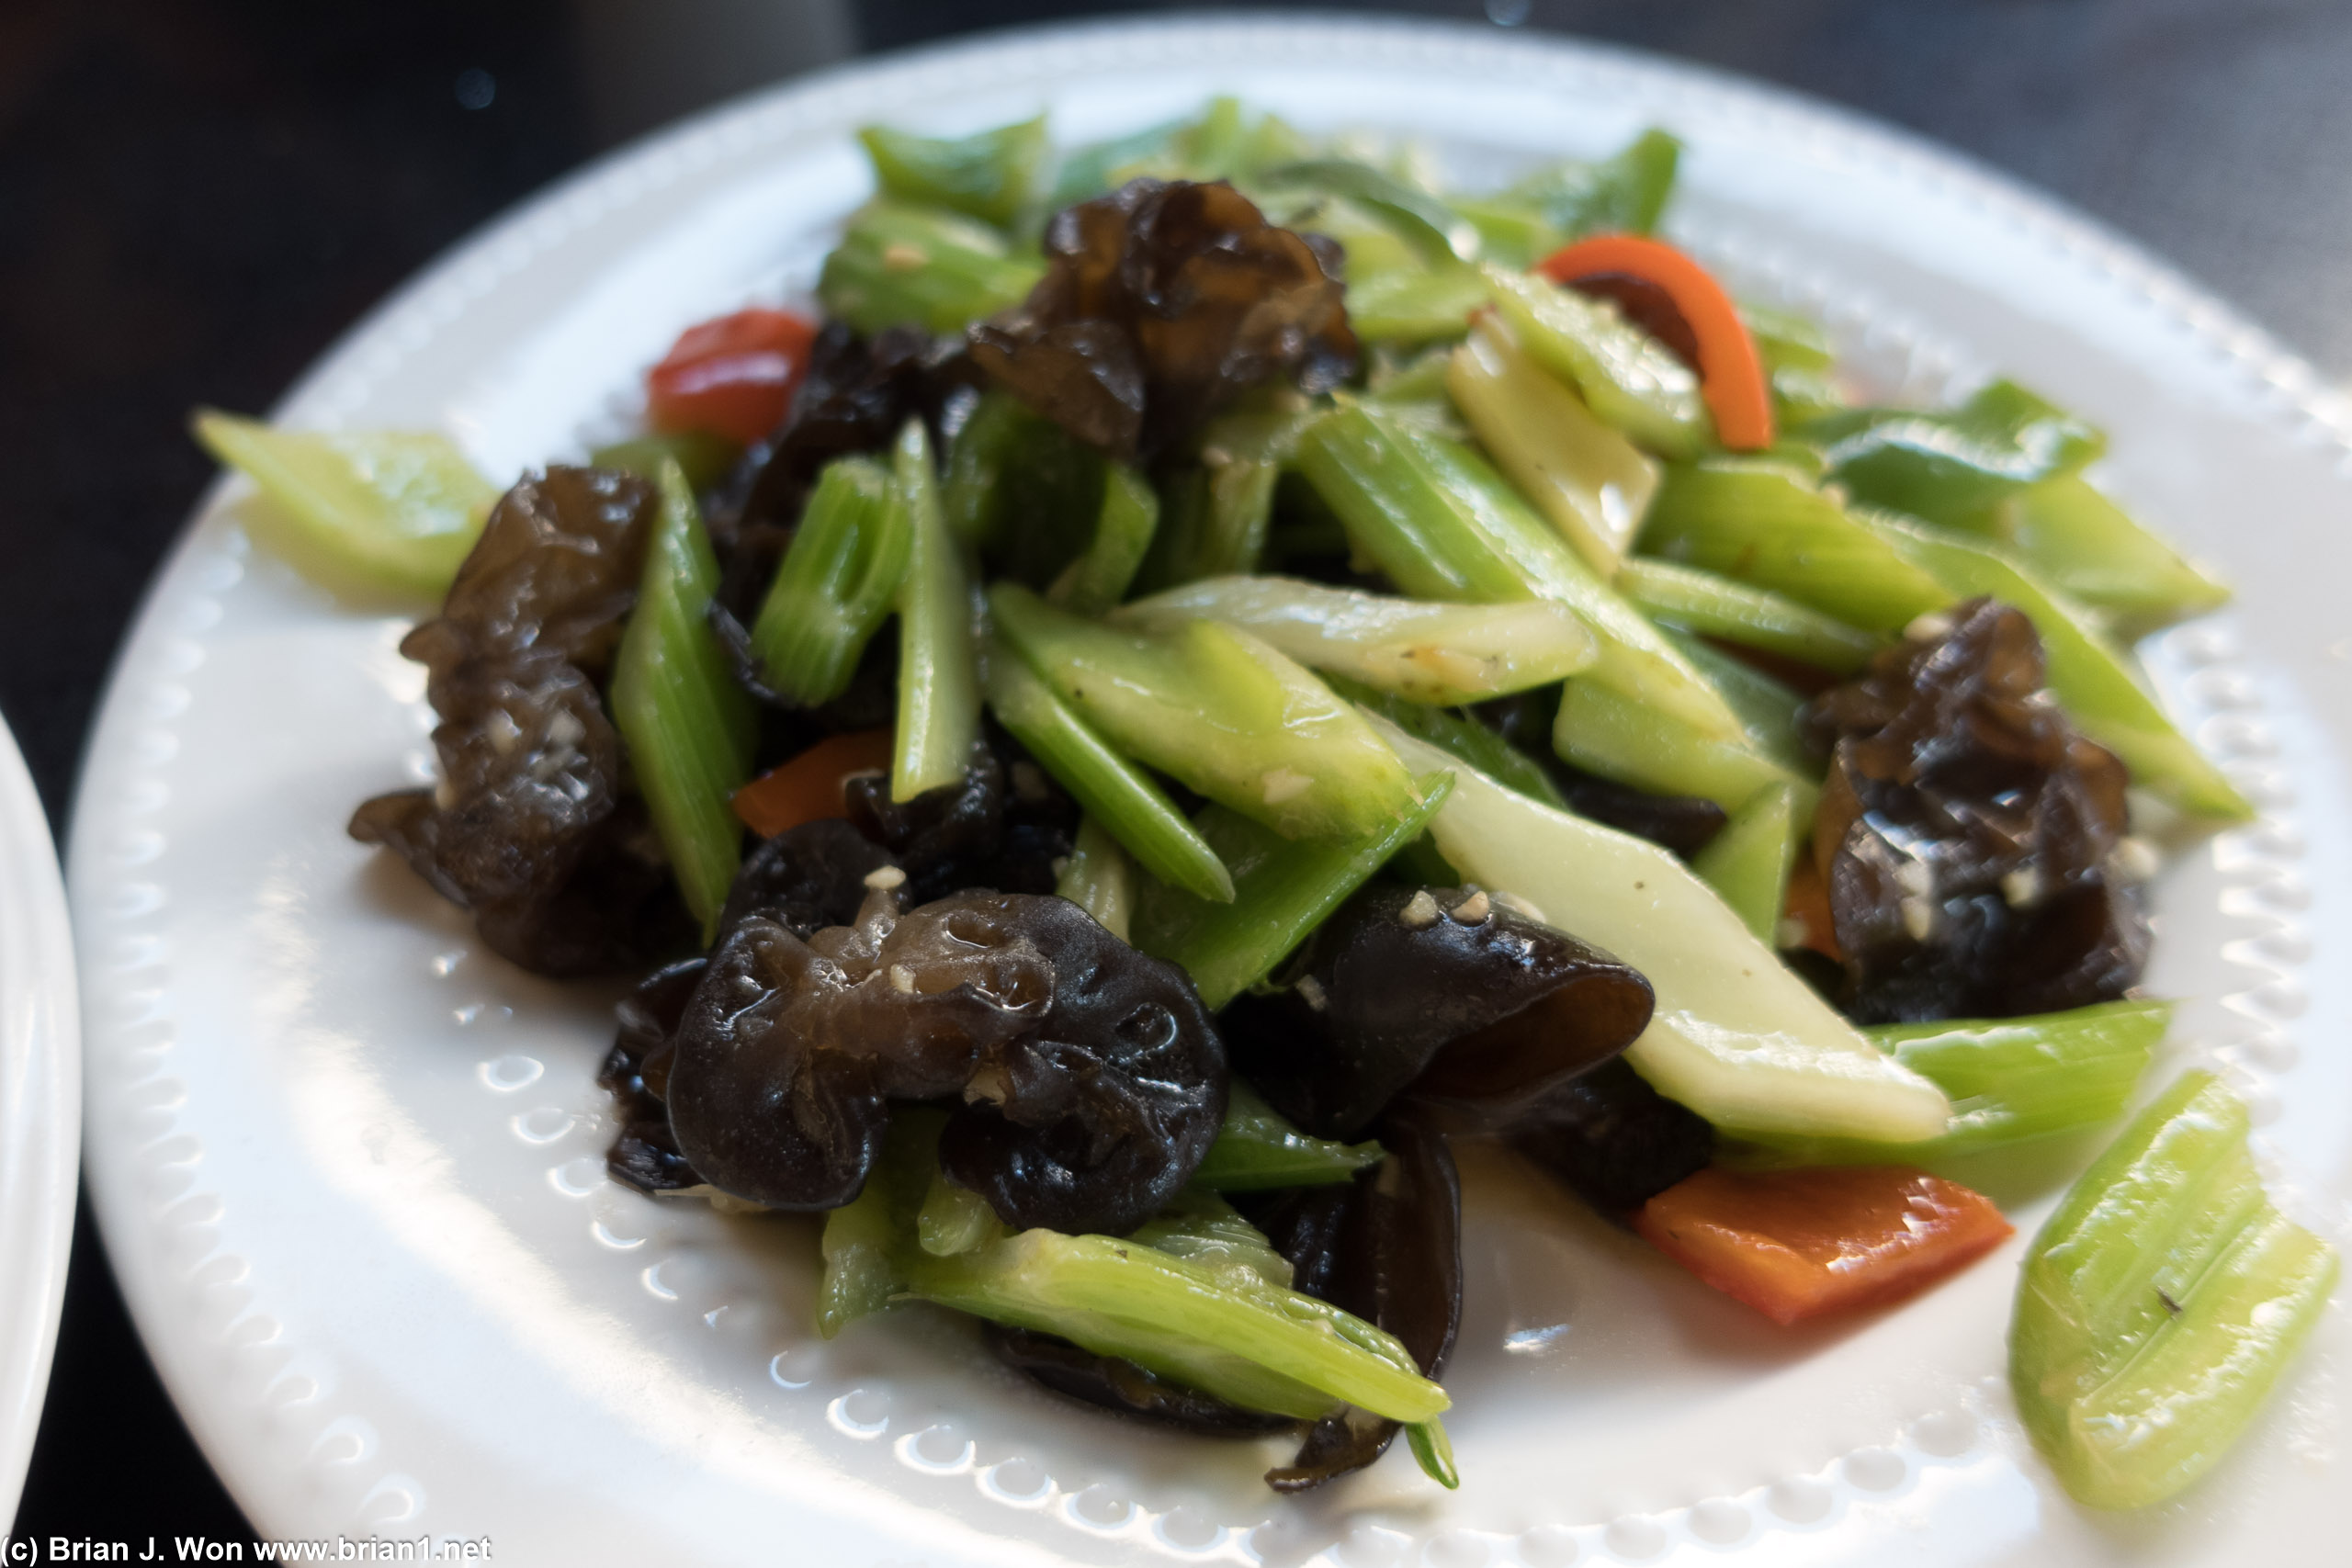 Black fungus and celery. A tad too salty.